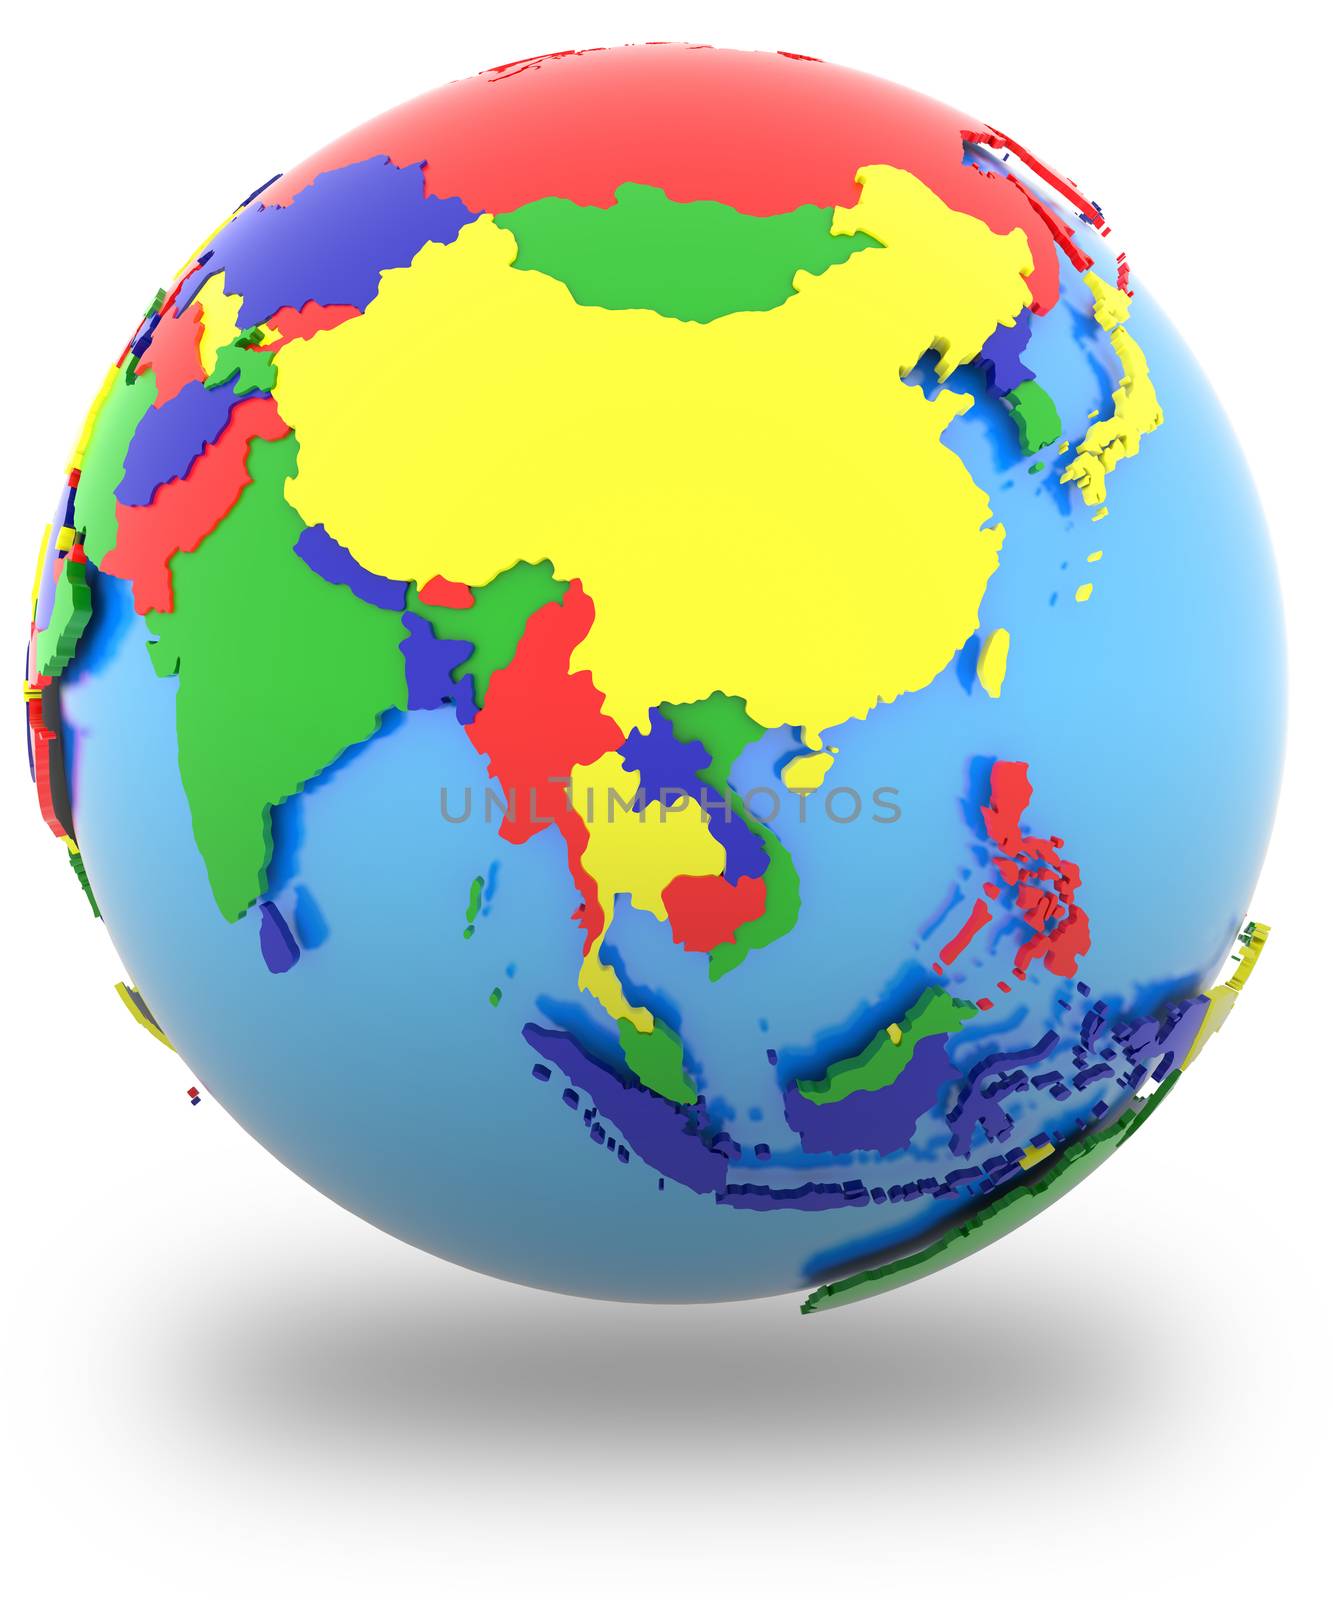 Asia on Earth by Harvepino